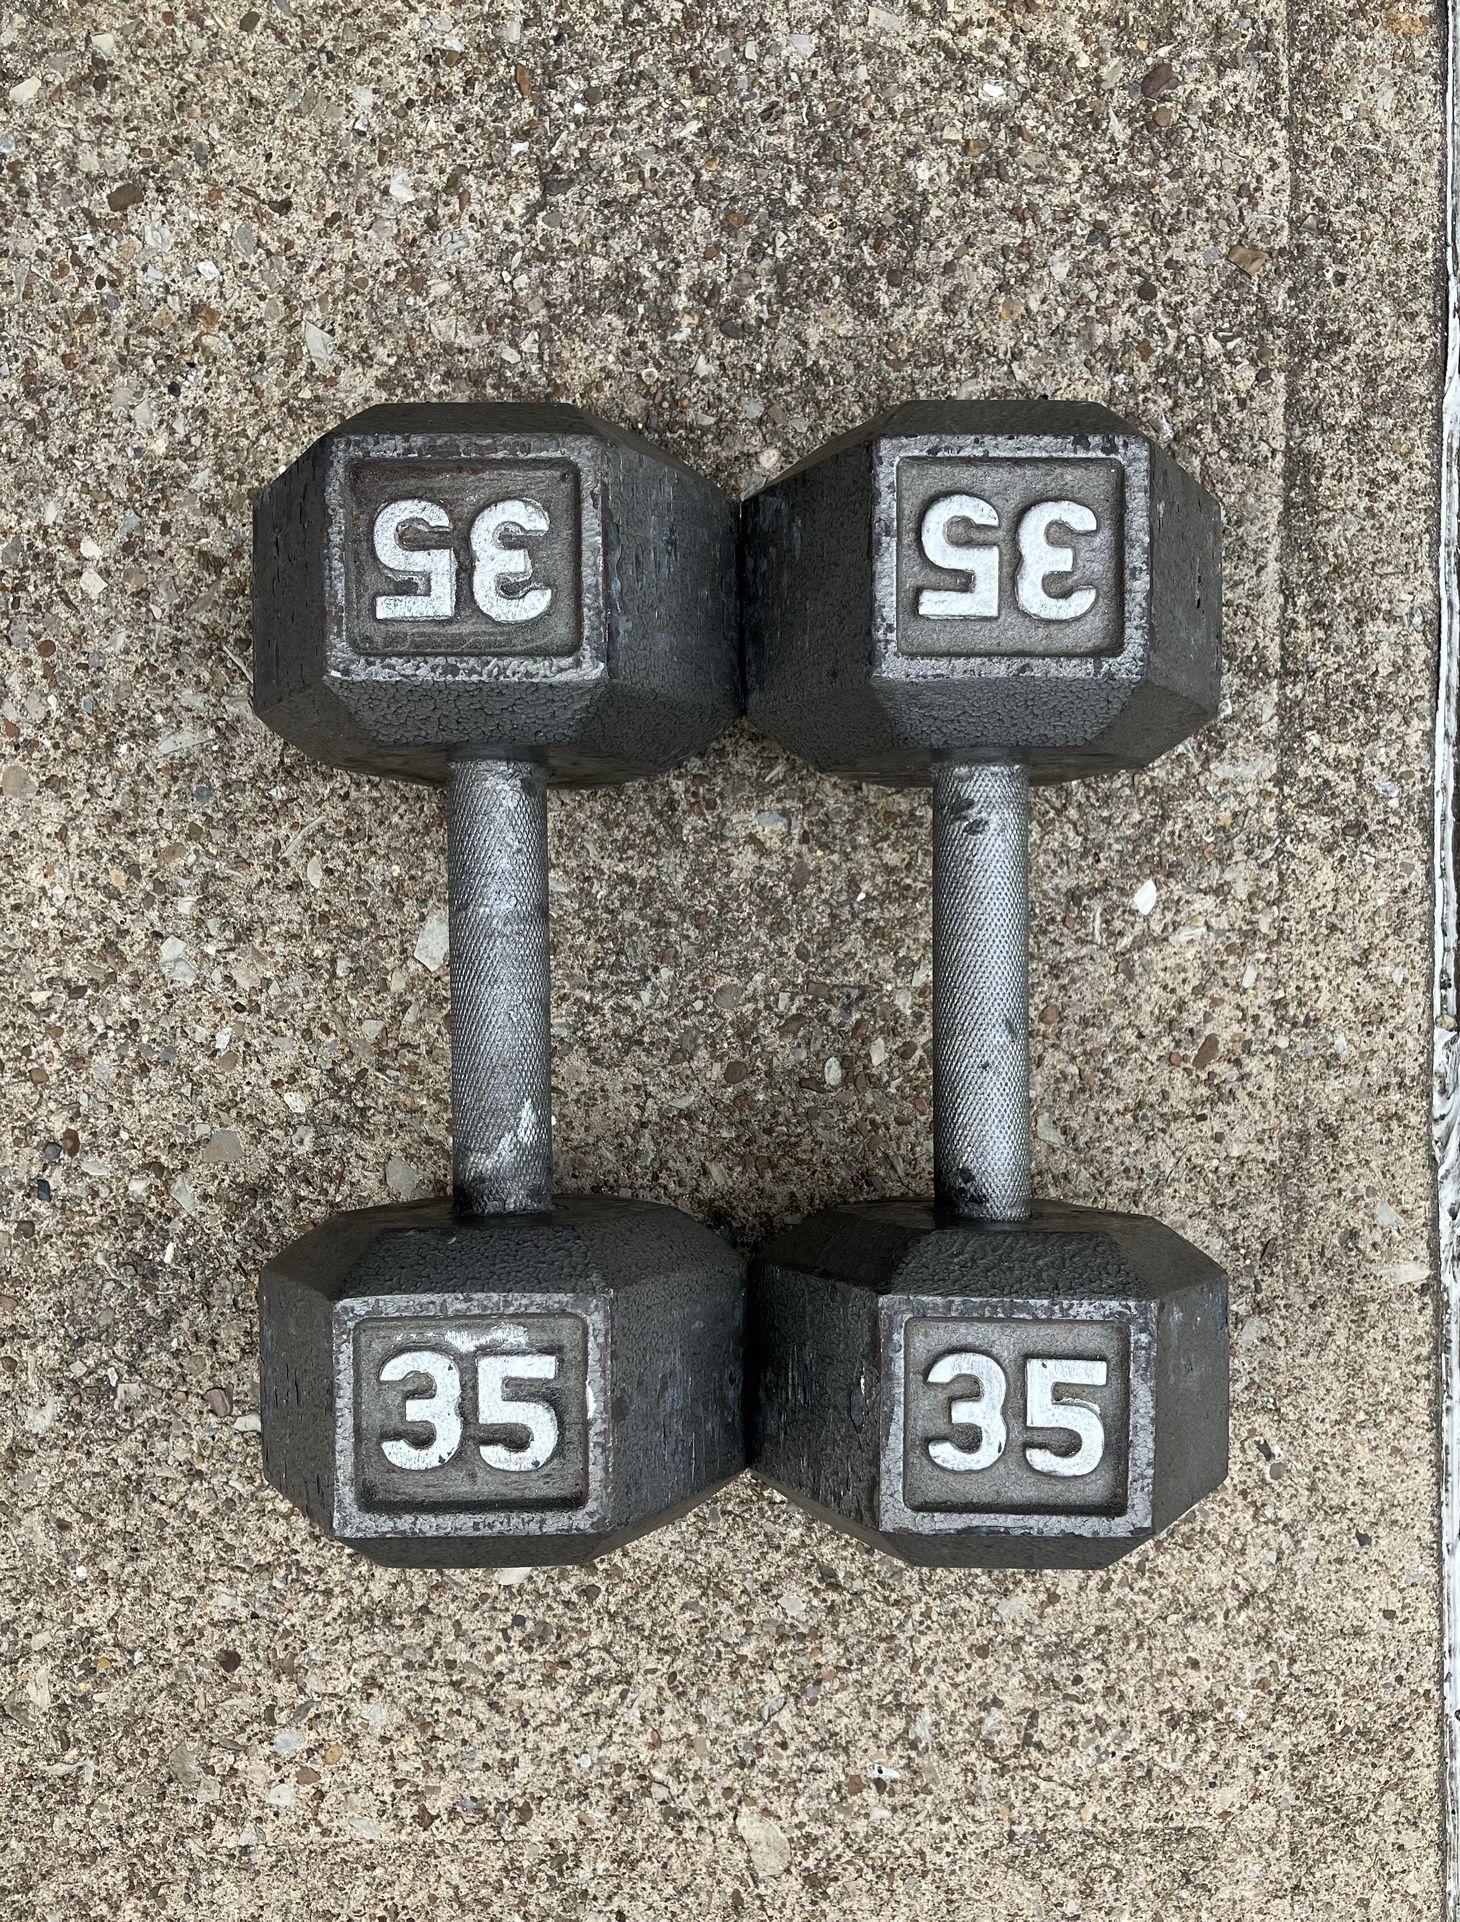 35lb Cast Iron Hex dumbbell set dumbbells 35 lb lbs 35lbs Weight Weights 70lbs total Workout Weightlifting